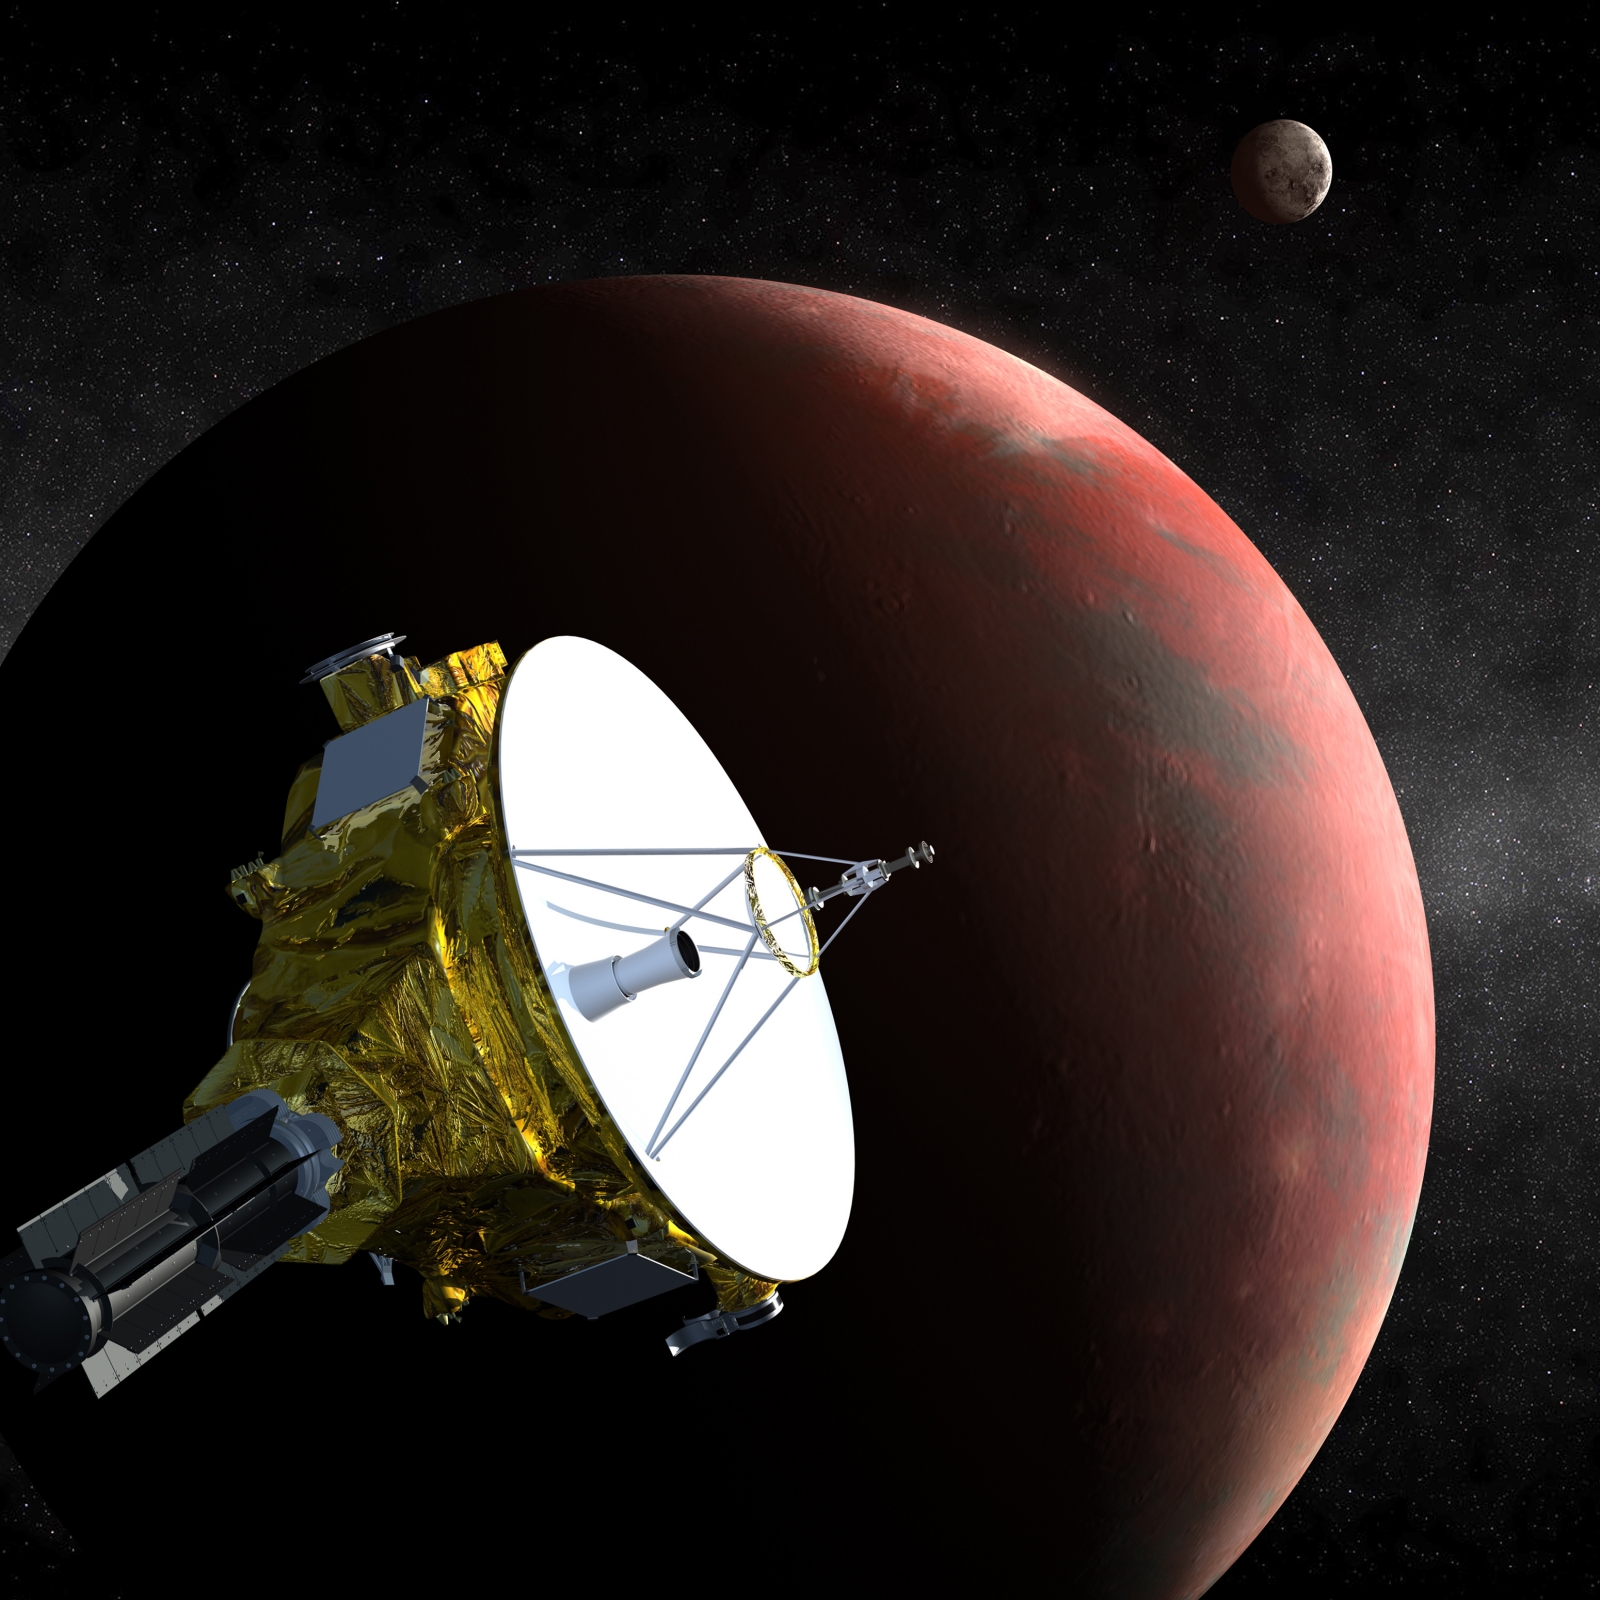 An artists impression of the New Horizons space probe, which will begin photographing Pluto today. (Reuters)